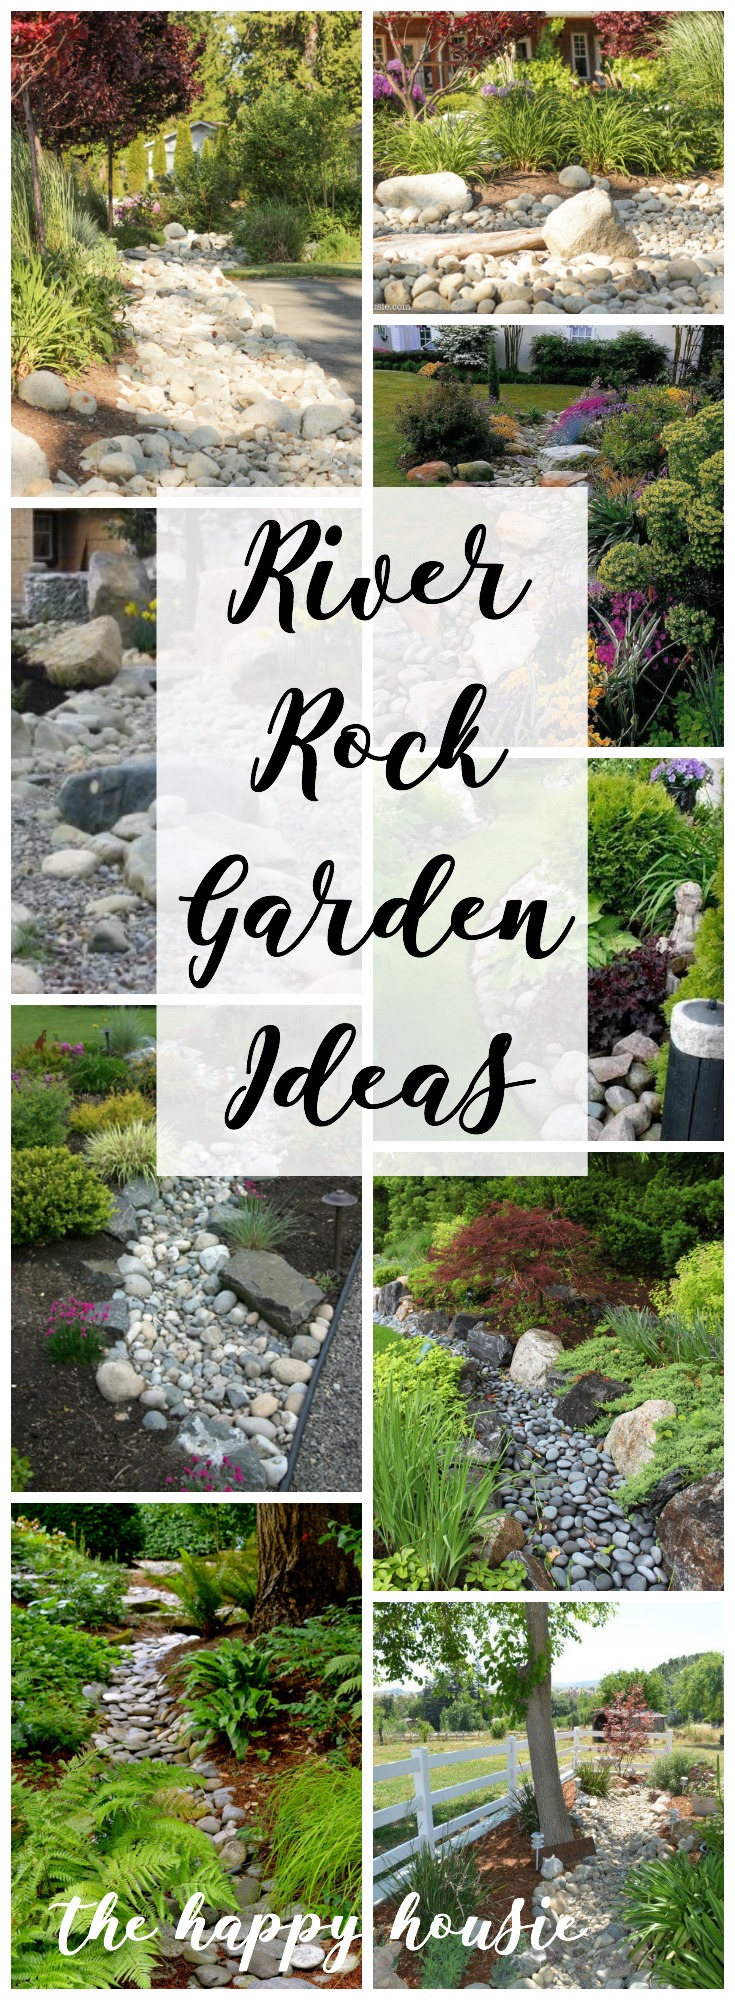 Dry River Rock Garden Ideas, How To Place River Rock Landscaping